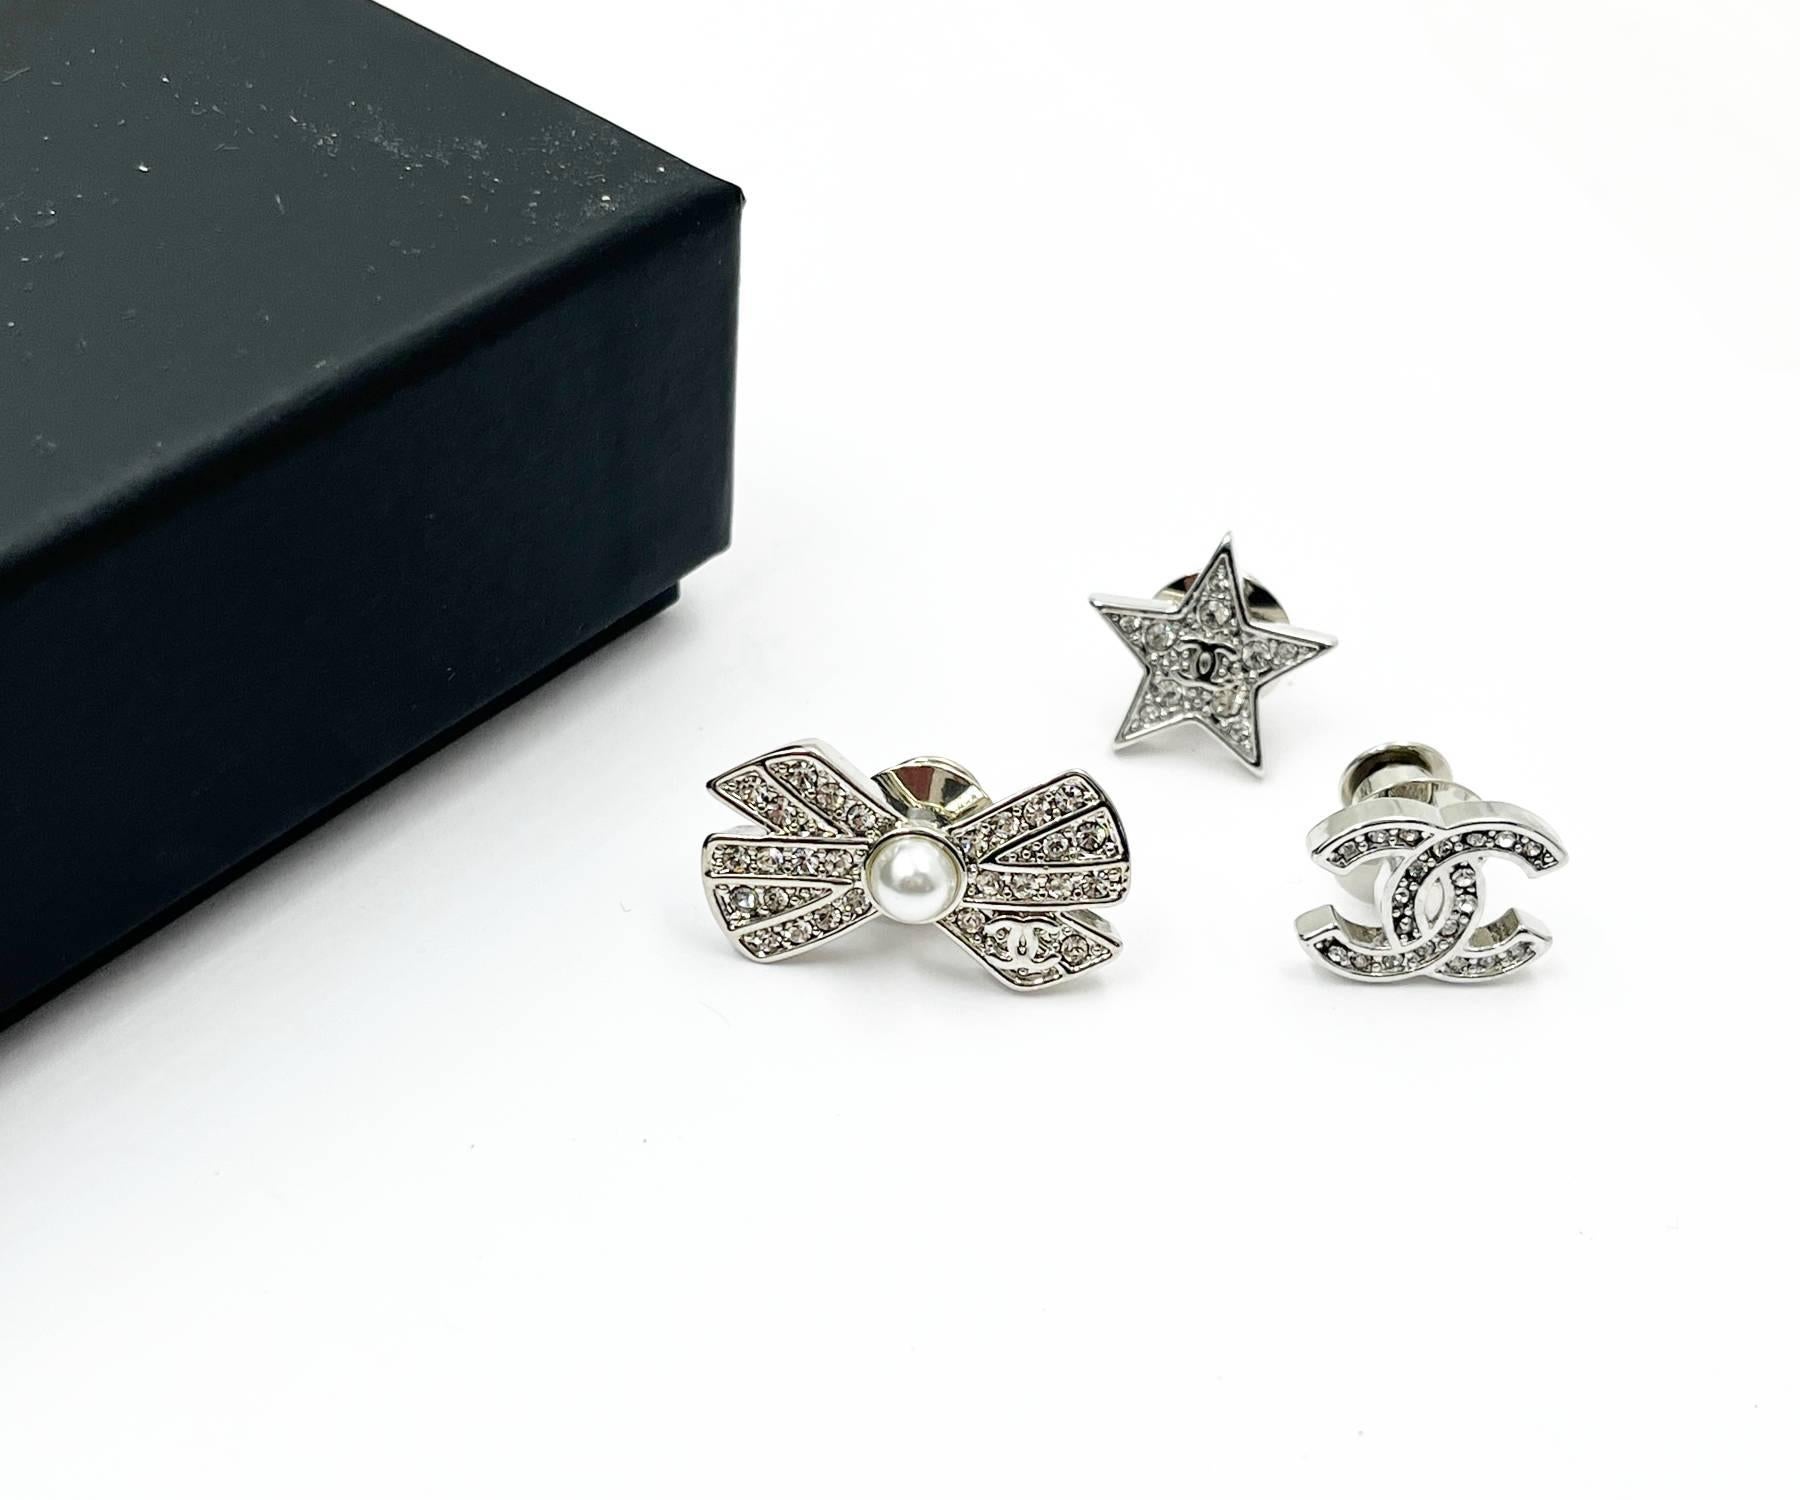 Artisan Chanel Brand New Silver CC Star Bow Crystal 3 Pins Brooch For Sale